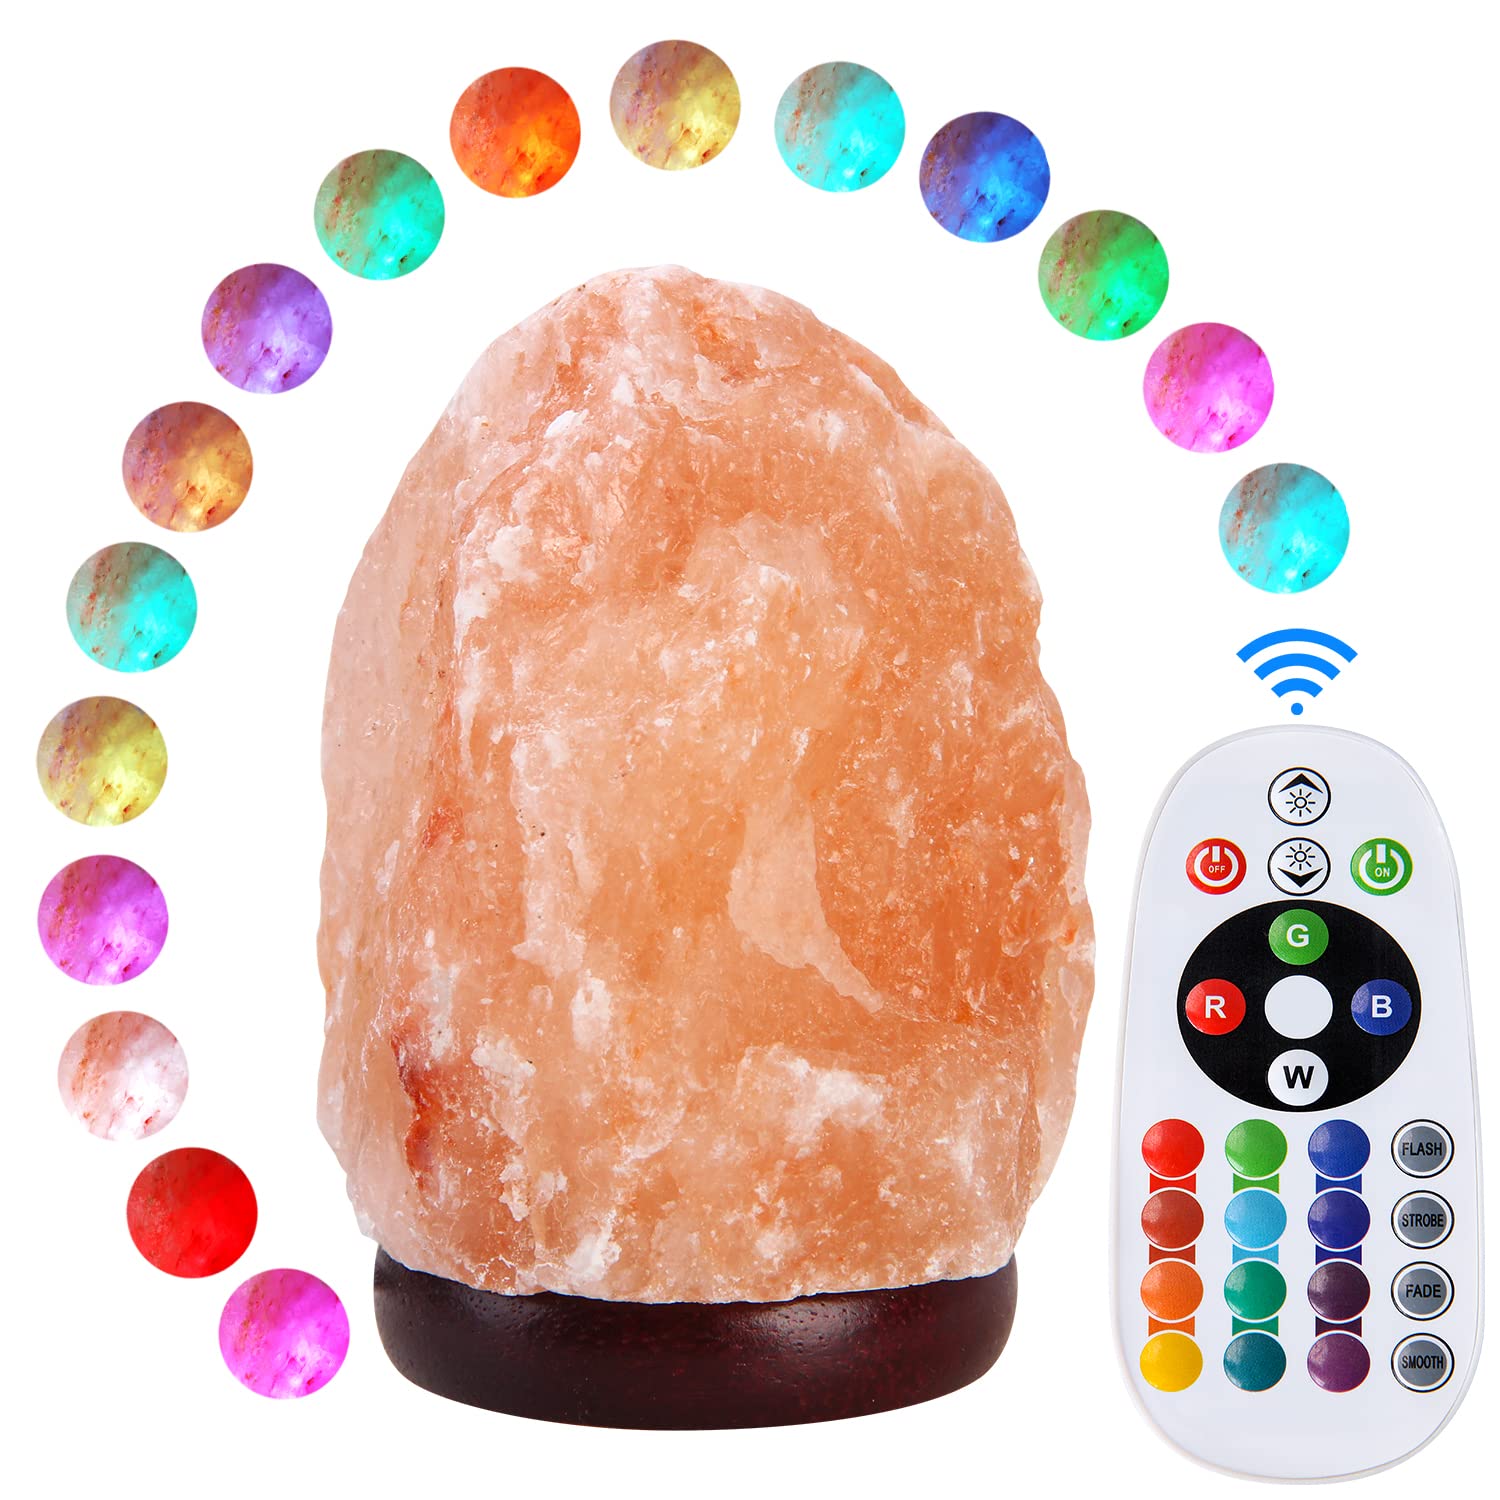 pursalt Himalayan Salt Lamp Night Light with Remote Control, Upgraded 16 Colors Changing & 4 Light Modes LED USB Salt Rock Lamp, Natural Crystal Pink Mini Small Salt Lamp for Home Decor and Gift